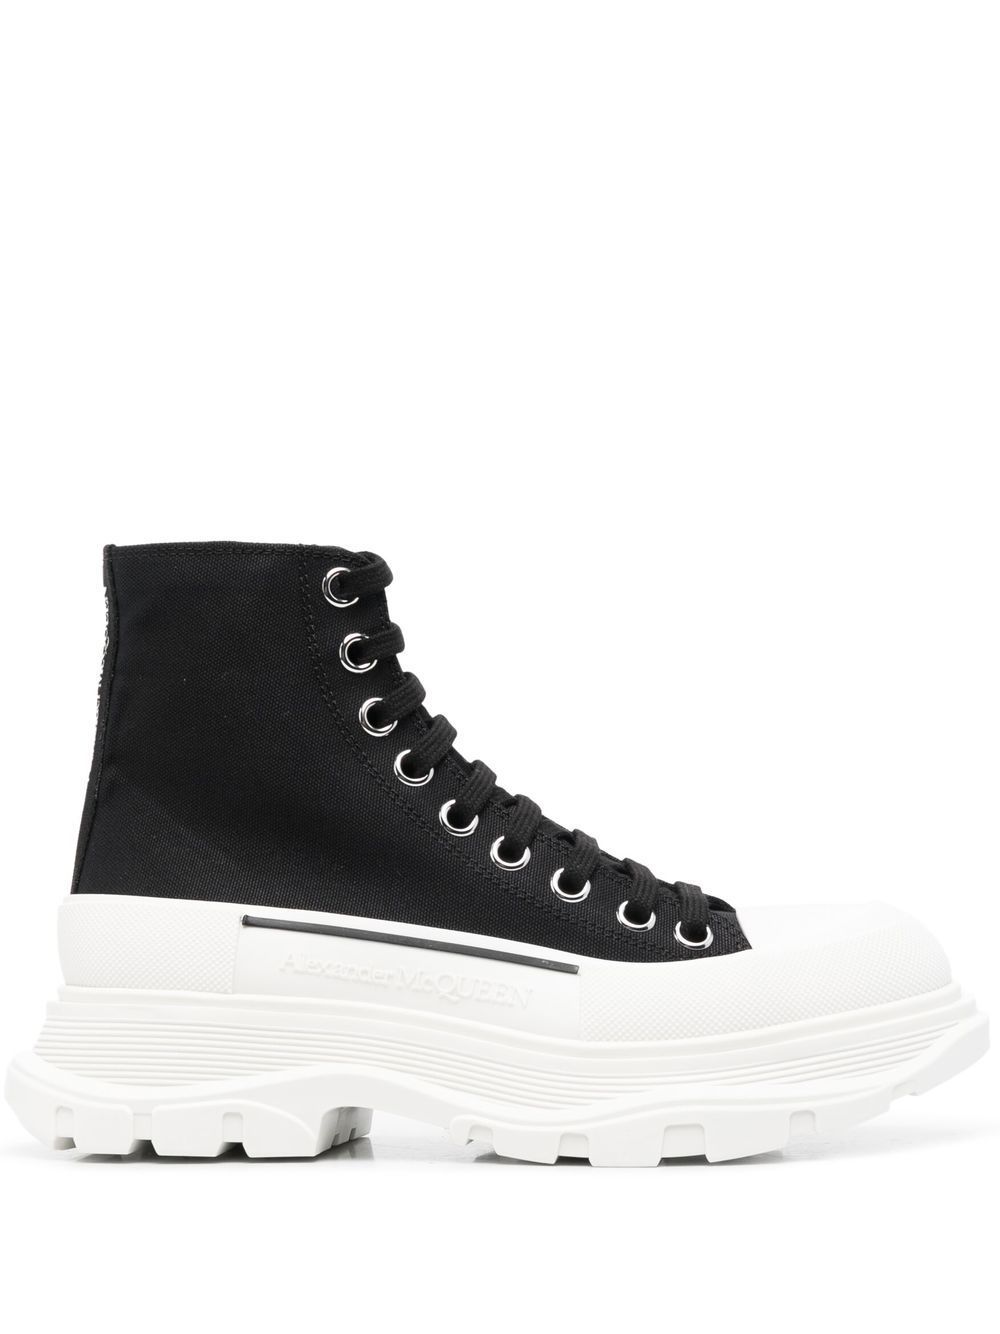 Tread Slick lace-up sneakers